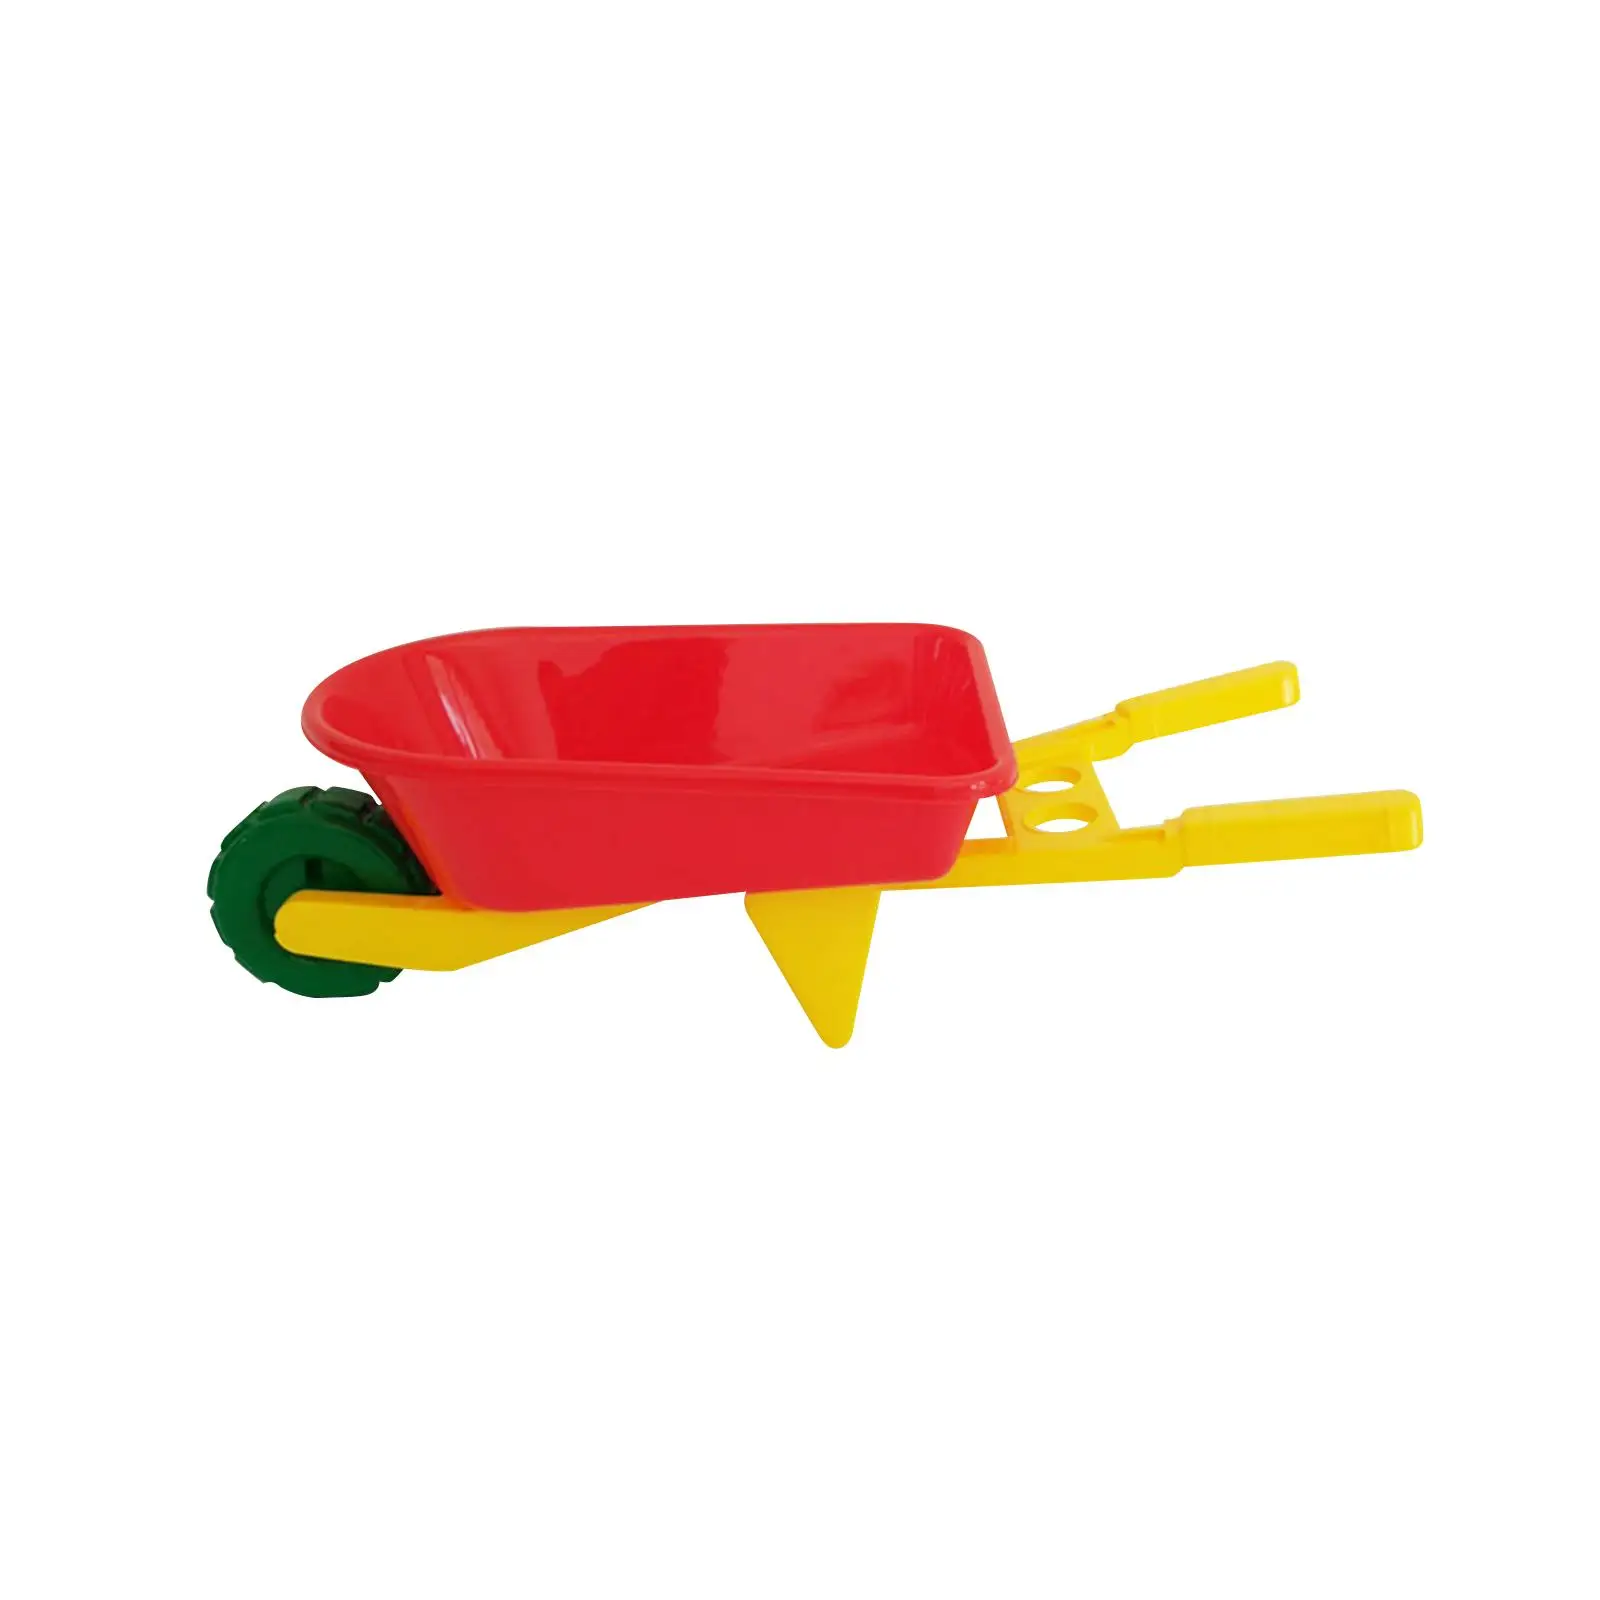 Sand Wheelbarrow Kids Play Sand Easy to Carry Sandpit Toys with Single Wheel for Kids Gardening Ages 2 Years Old up Children